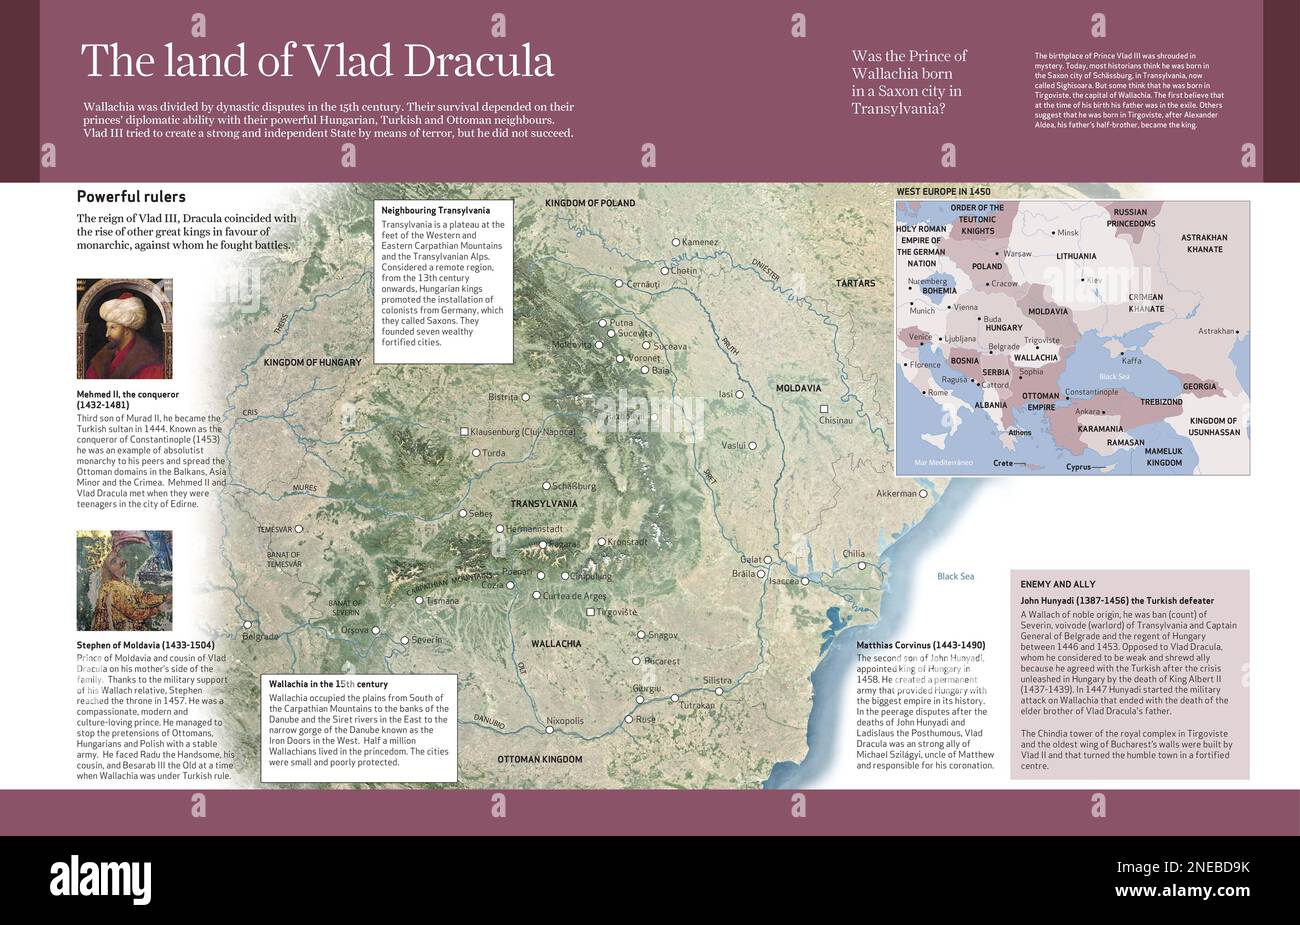 Computer graphics about the Wallachia region and the neighbouring kingdoms in the 15th century, Vlad Draculea times, that inspired the character of Dracula. [Adobe InDesign (.indd); 4960x3188]. Stock Photo